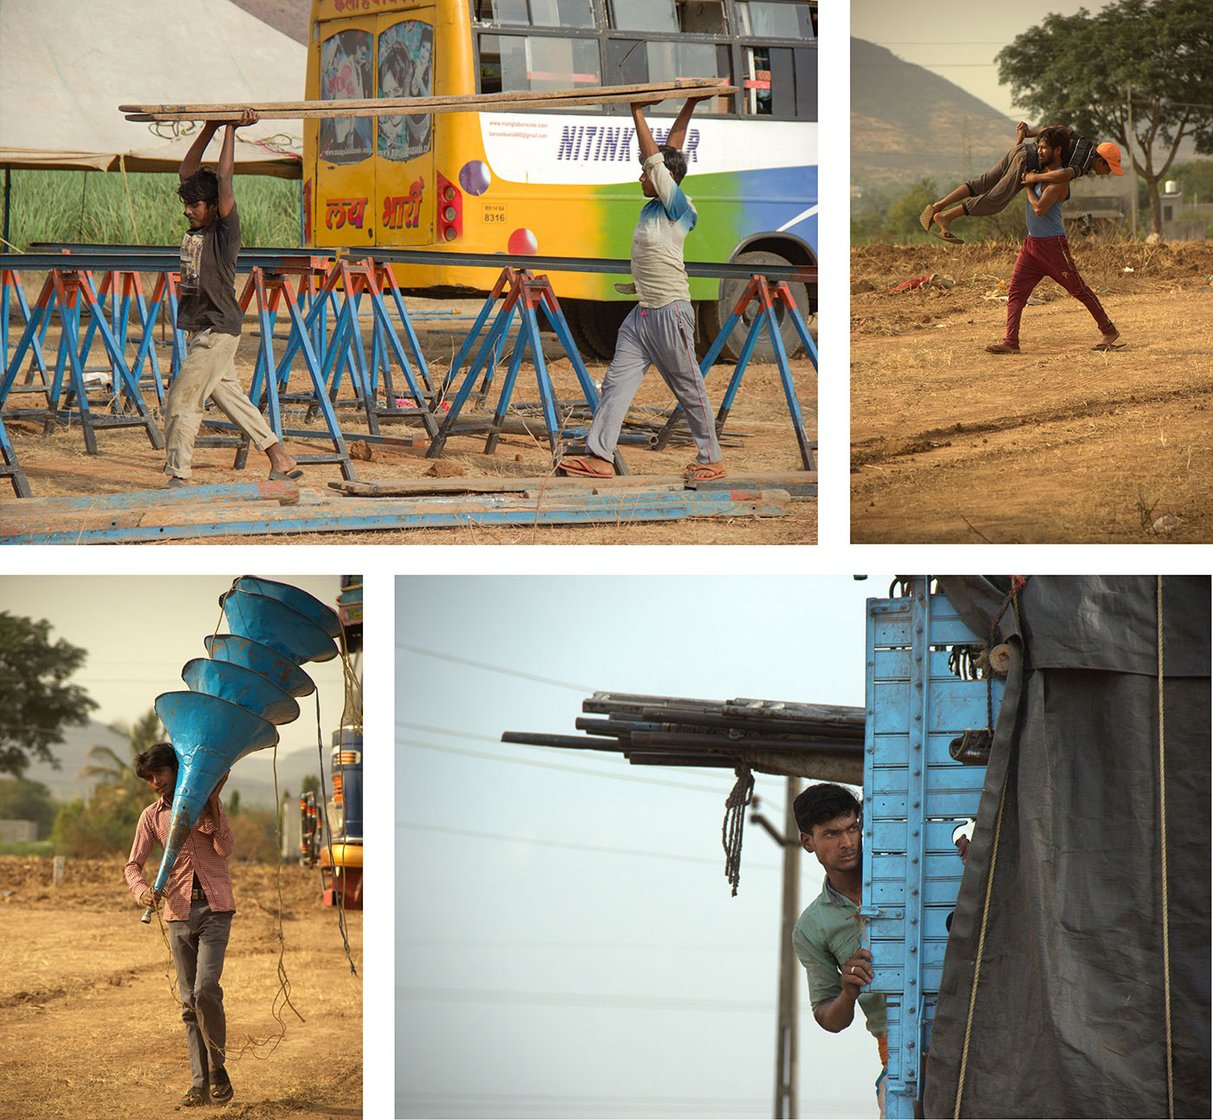 Top left-Labourers from Aumau village, Lucknow district, UP carry planks for the tamasha stage on 4 May 2018 in Karavadi village, Satara district, in western Maharashtra. 

Top right-Lallan Paswan from Aumau village, Lucknow district, UP playfully carries one of his friends while working on tents, on 4 May 2018 in Karavadi village, Satara district, in western Maharashtra. 

Bottom left- Aravind Kumar carries speakers on 4 May 2018 in Karavadi village, Satara district, in western Maharashtra. 

Bottom right- Shreeram Paswan, a labourer from Aumau village, Lucknow district, UP, during stage building time on 4 May 2018 in Karavadi village, Satara district, in western Maharashtra